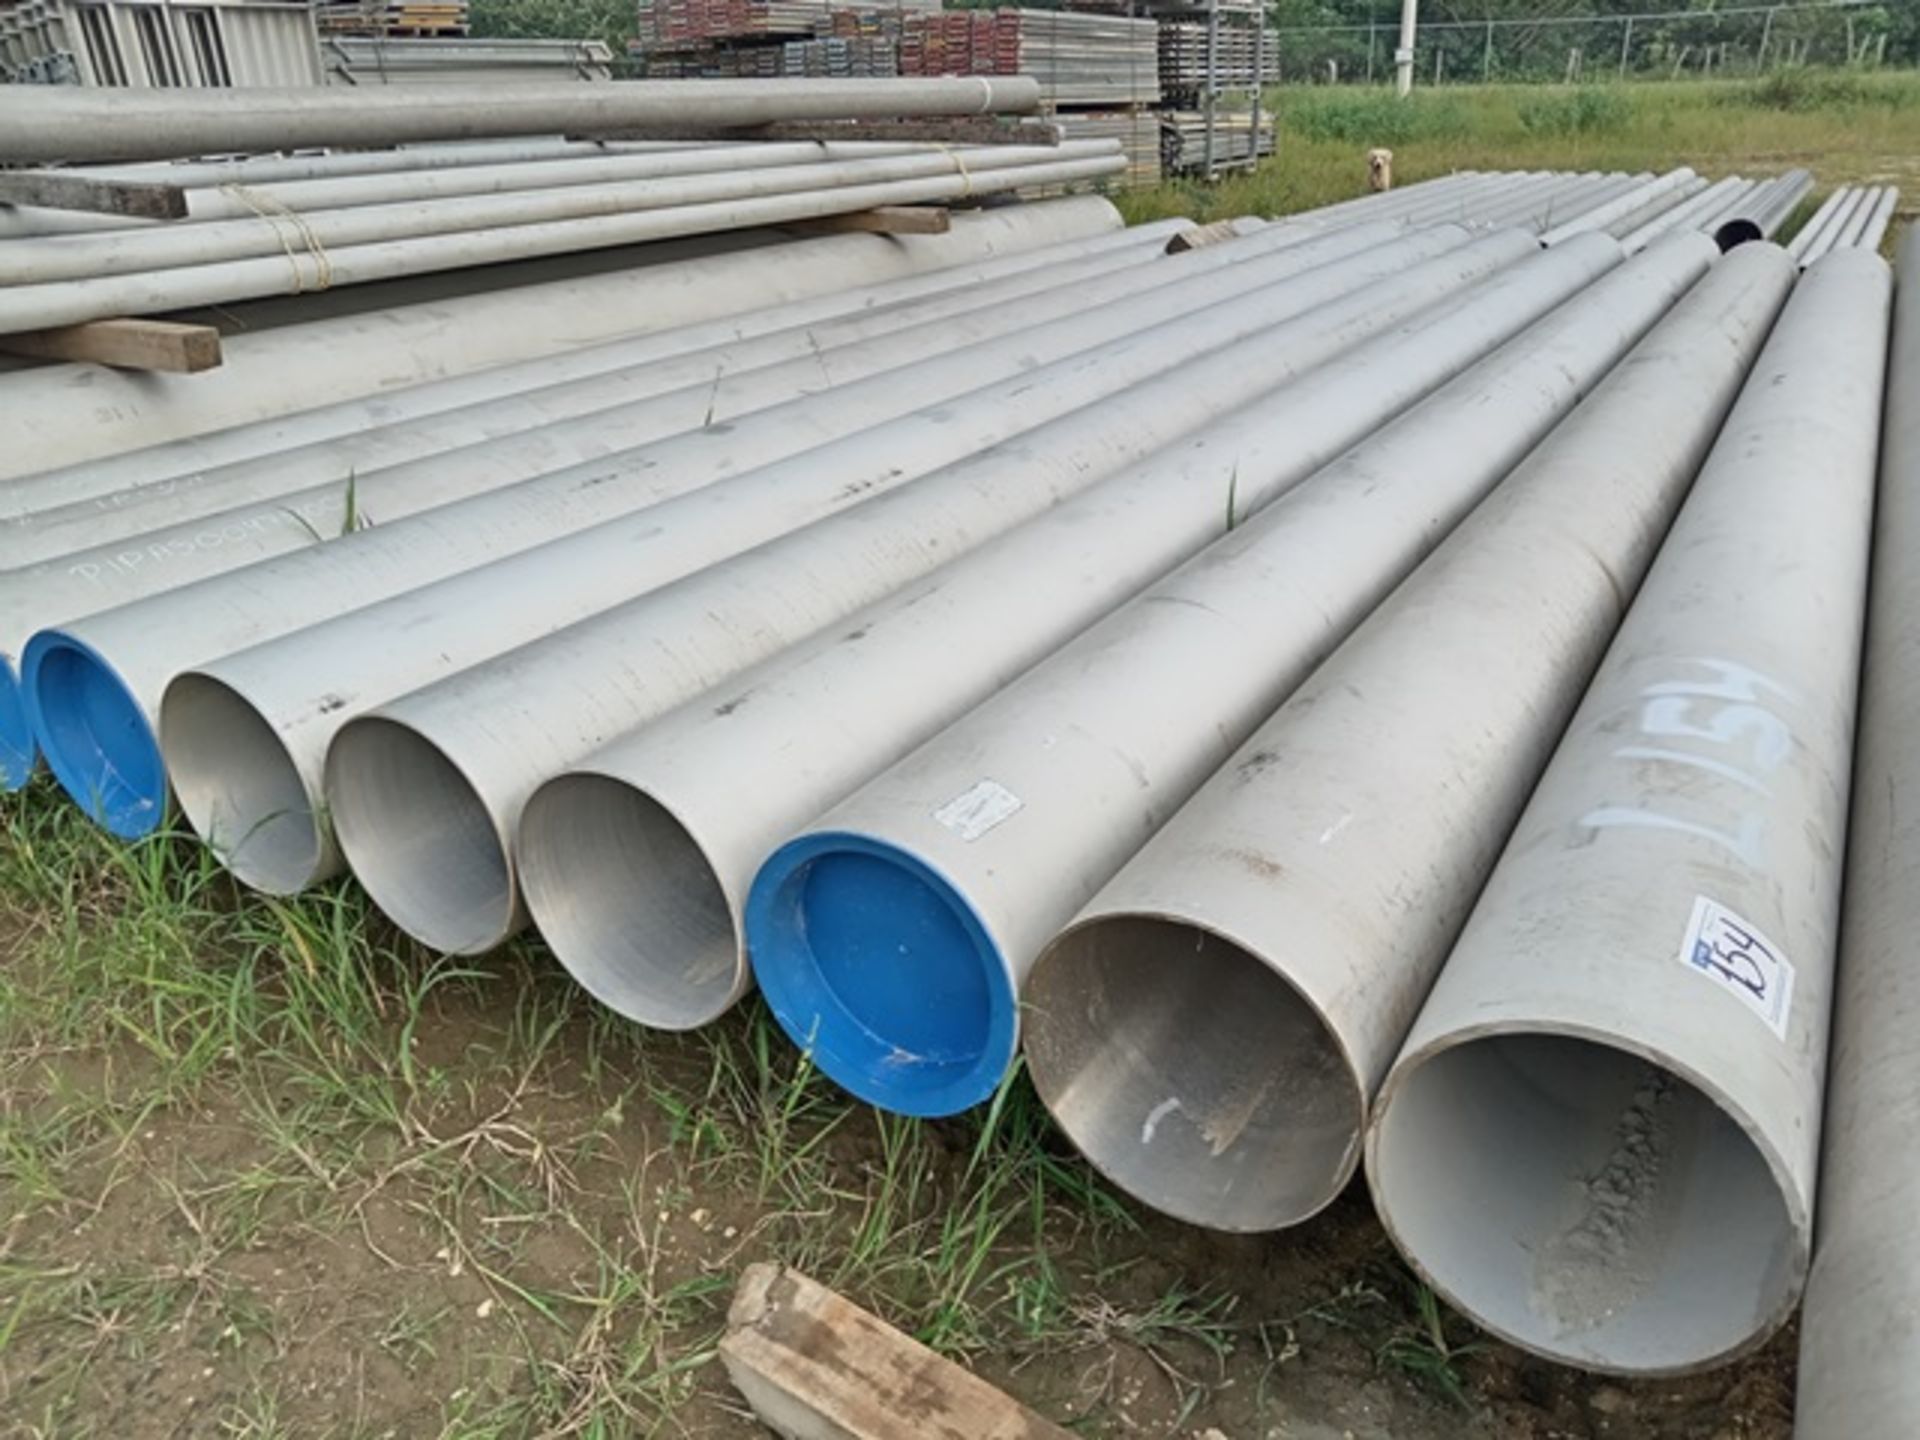 LOT OF APPROXIMATELY 133 METERS OF T-304 AND T-316 STAINLESS STEEL PIPE - Image 2 of 6